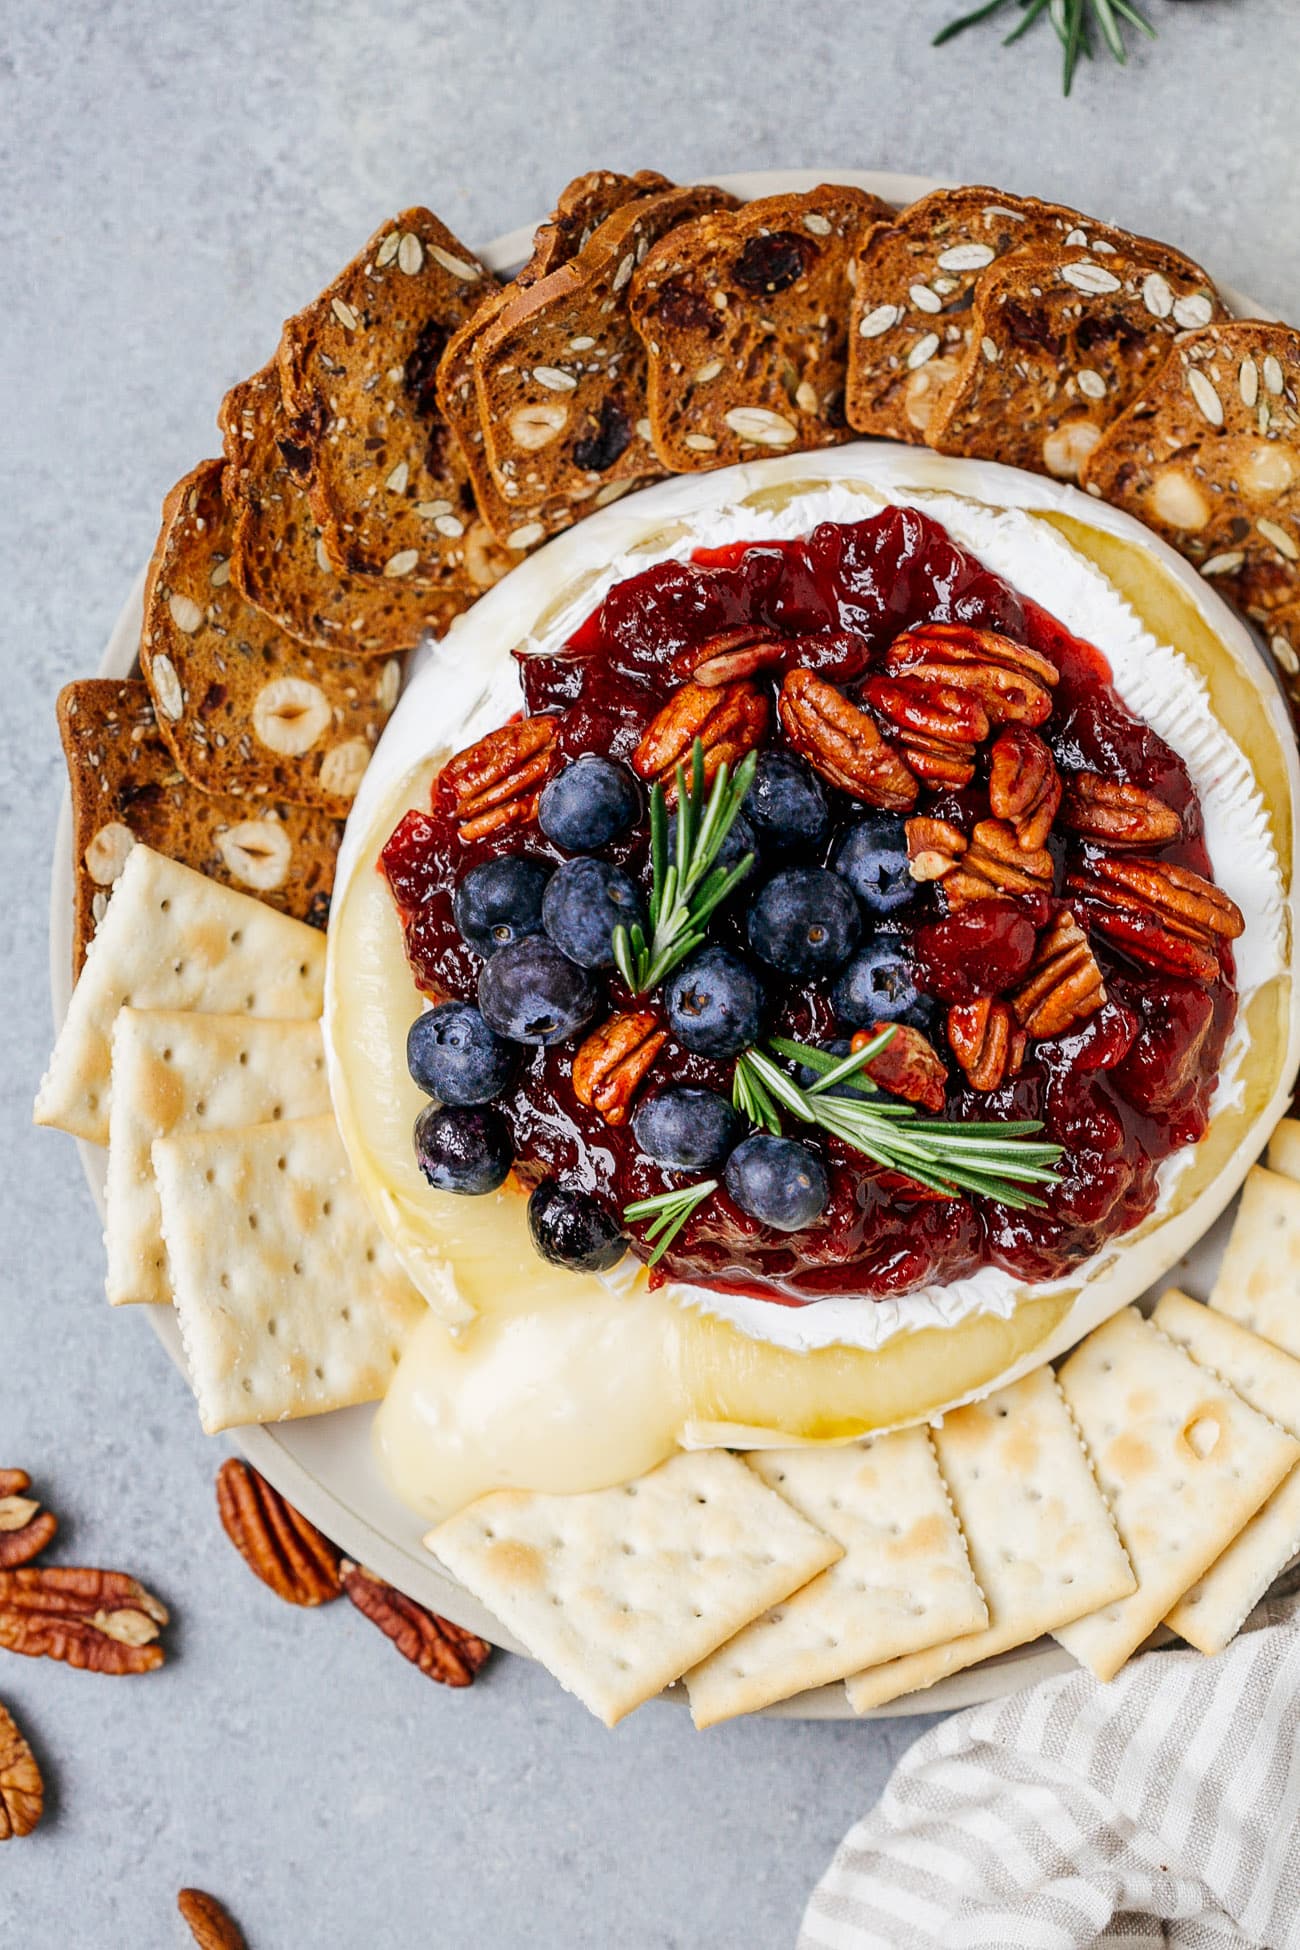 Overhead view of a baked brie with cranberry sauce served with crackers.